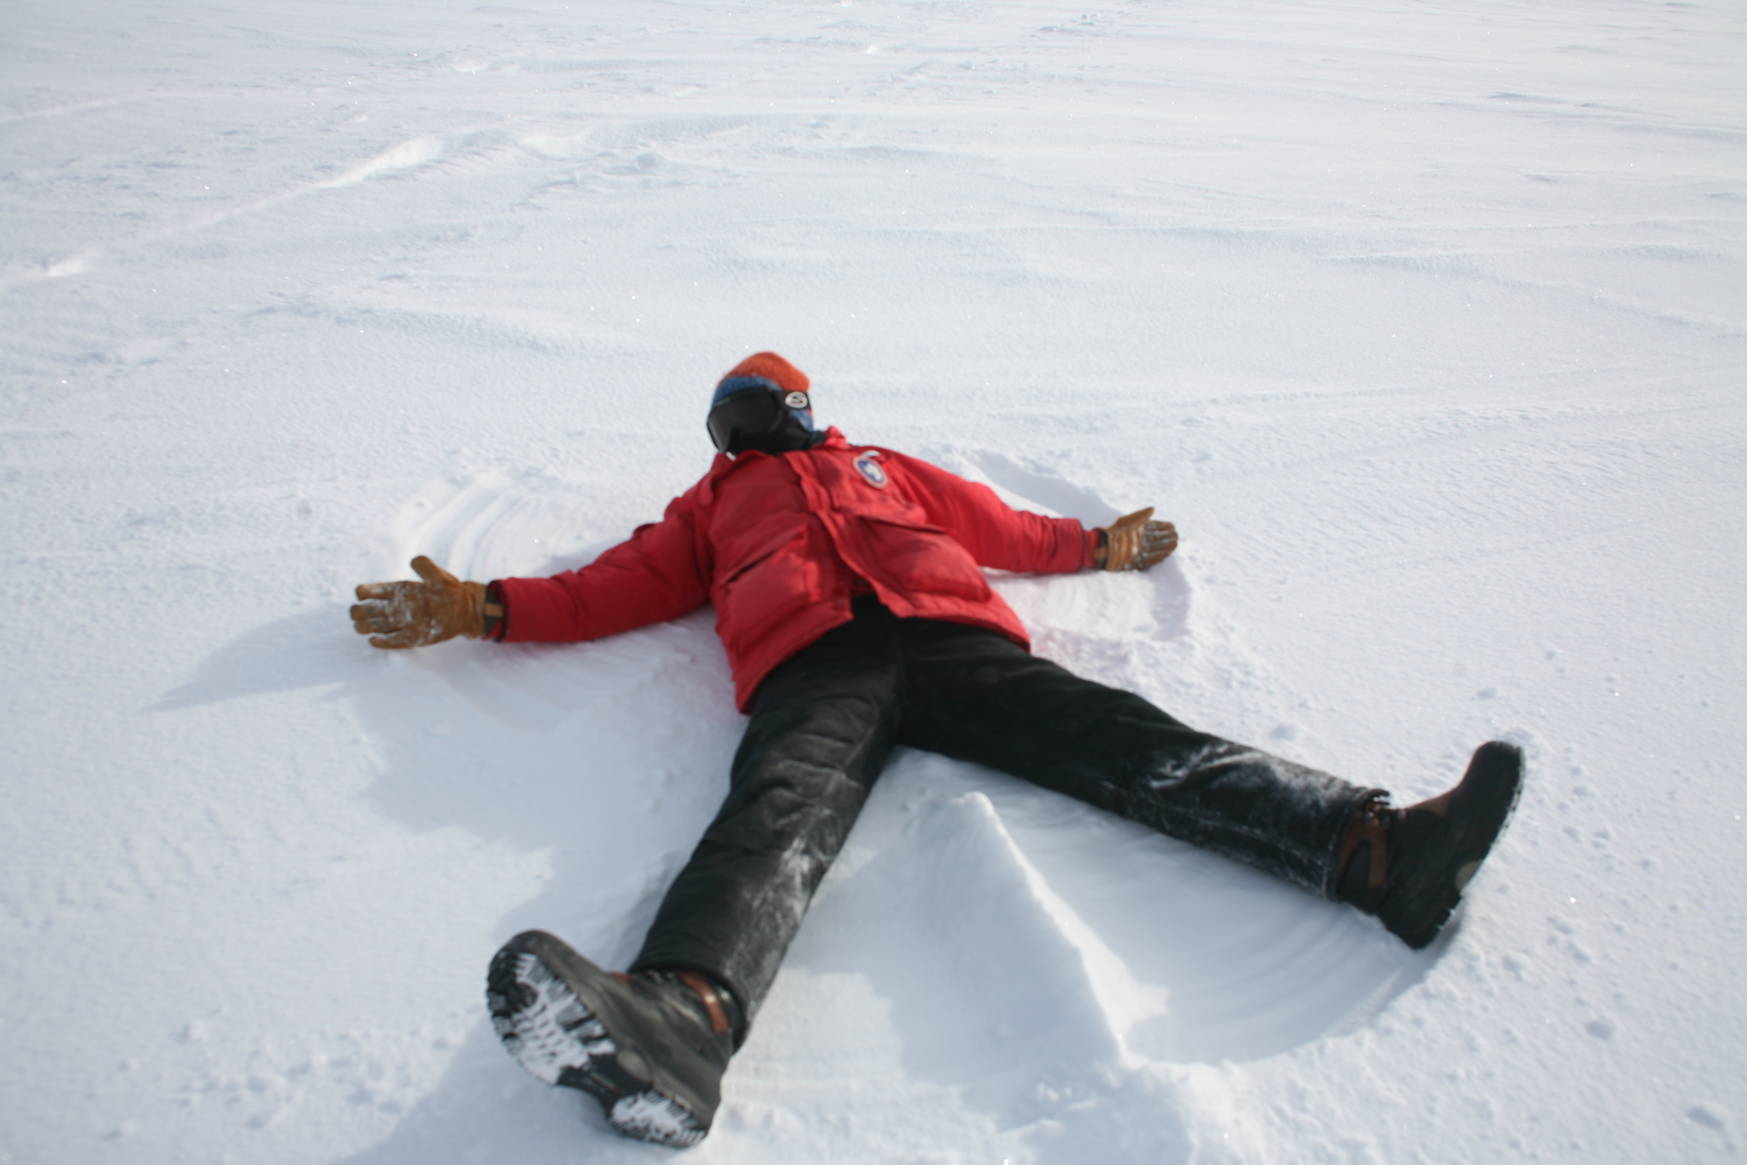 Snow angels at the south pole.